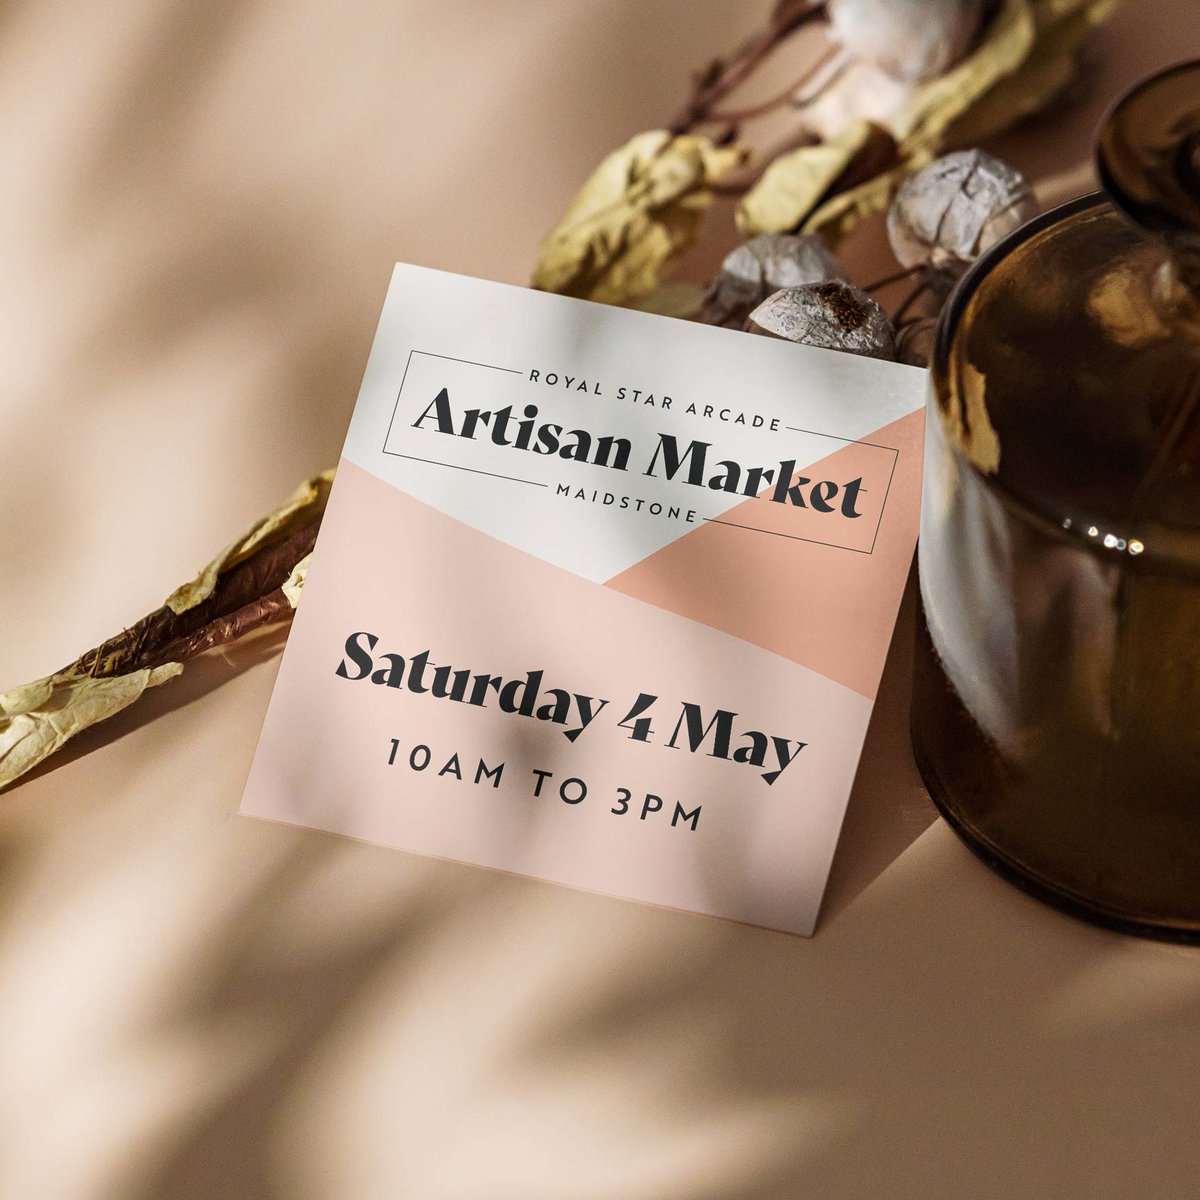 The Royal Star artisan market will take place this Saturday (4 May, 10am to 3pm). See you there!

#maidstone #royalstararcade #supportsmallbusiness #artisanmarket